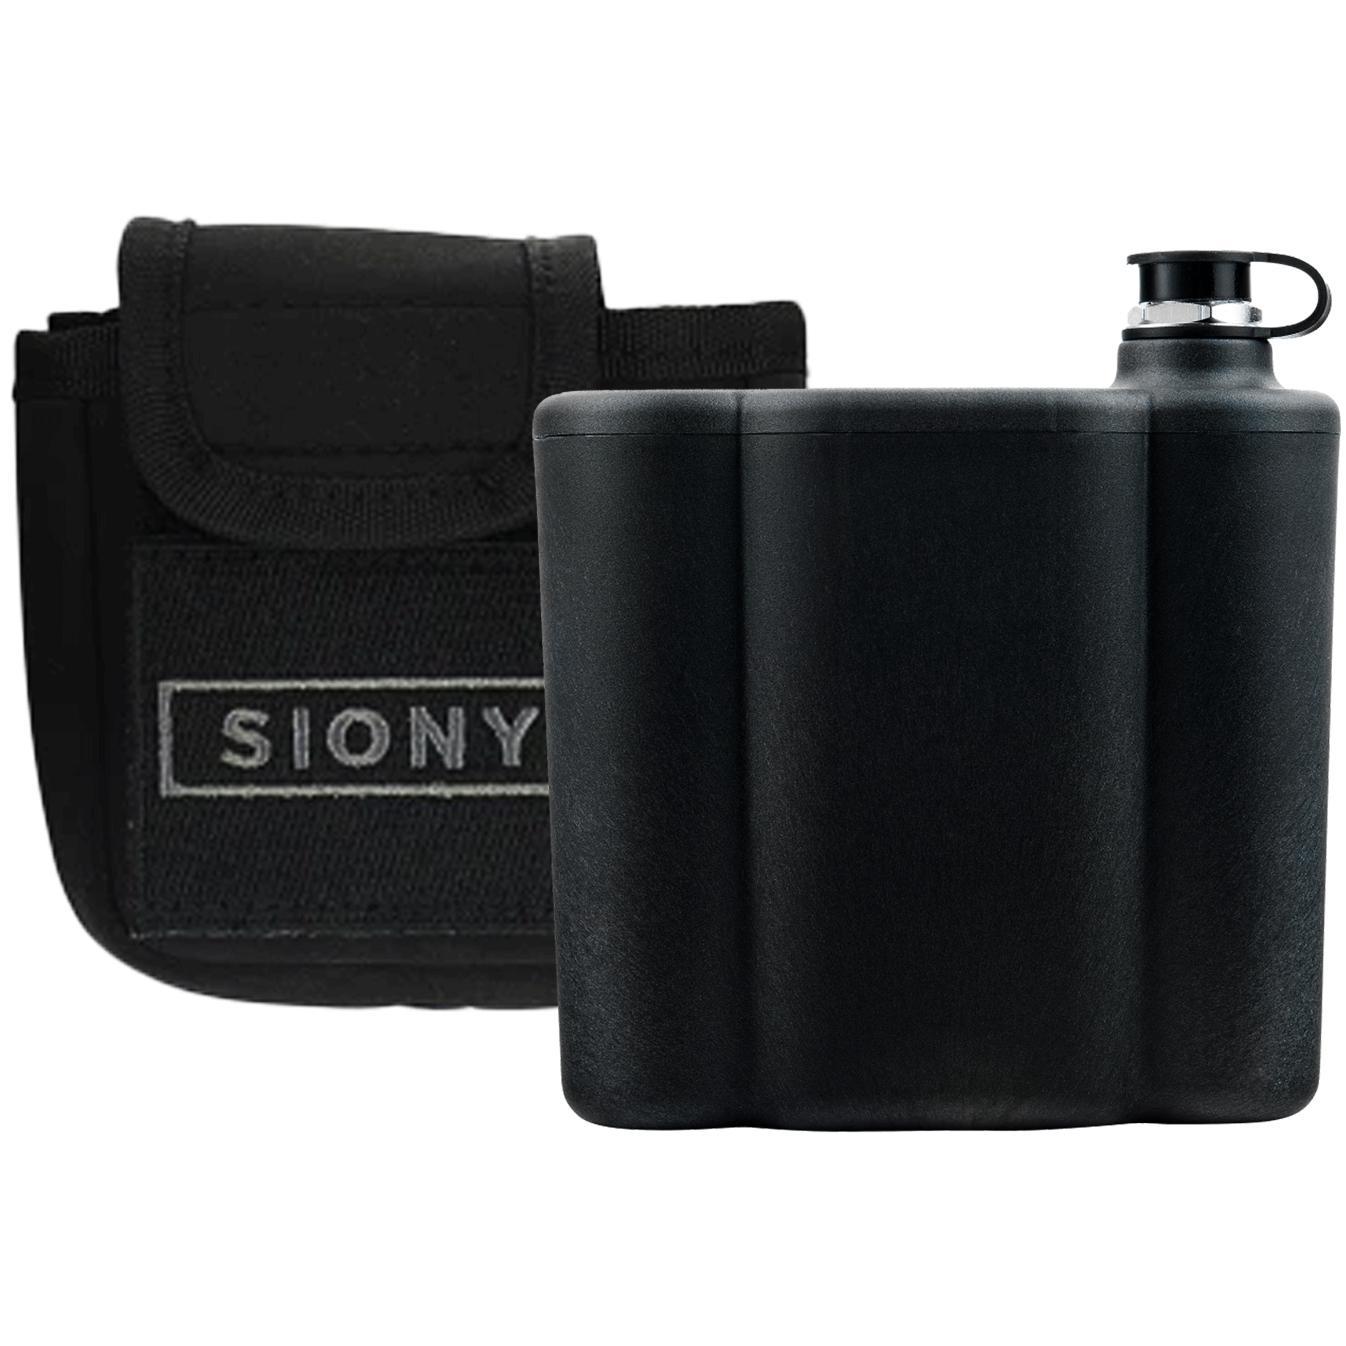 Sionyx - Opsin: Battery/Charger/Pouch Kit